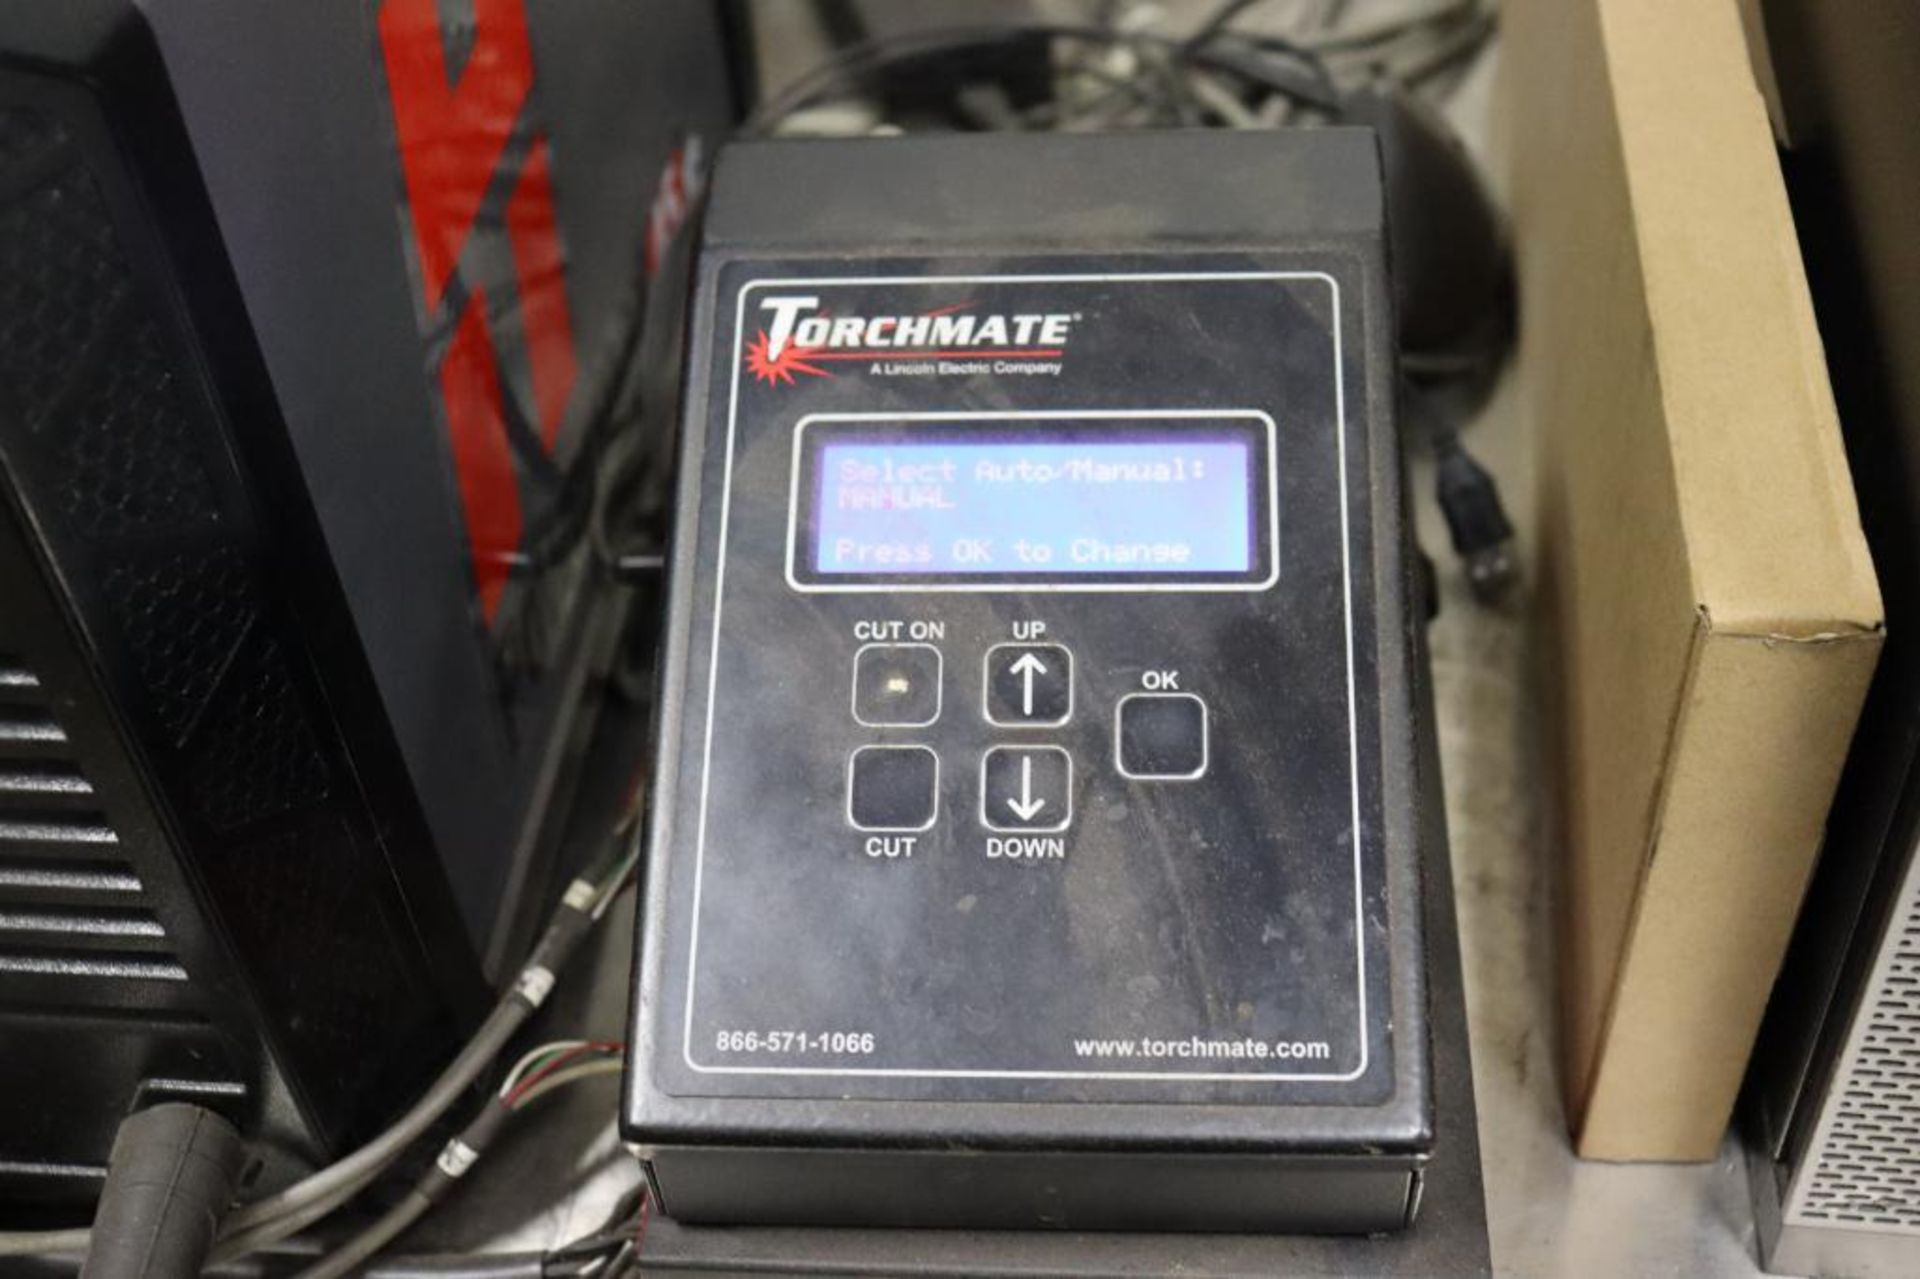 Torchmate 4 x 4 plasma table w/ Hypertherm 45 - Image 11 of 19